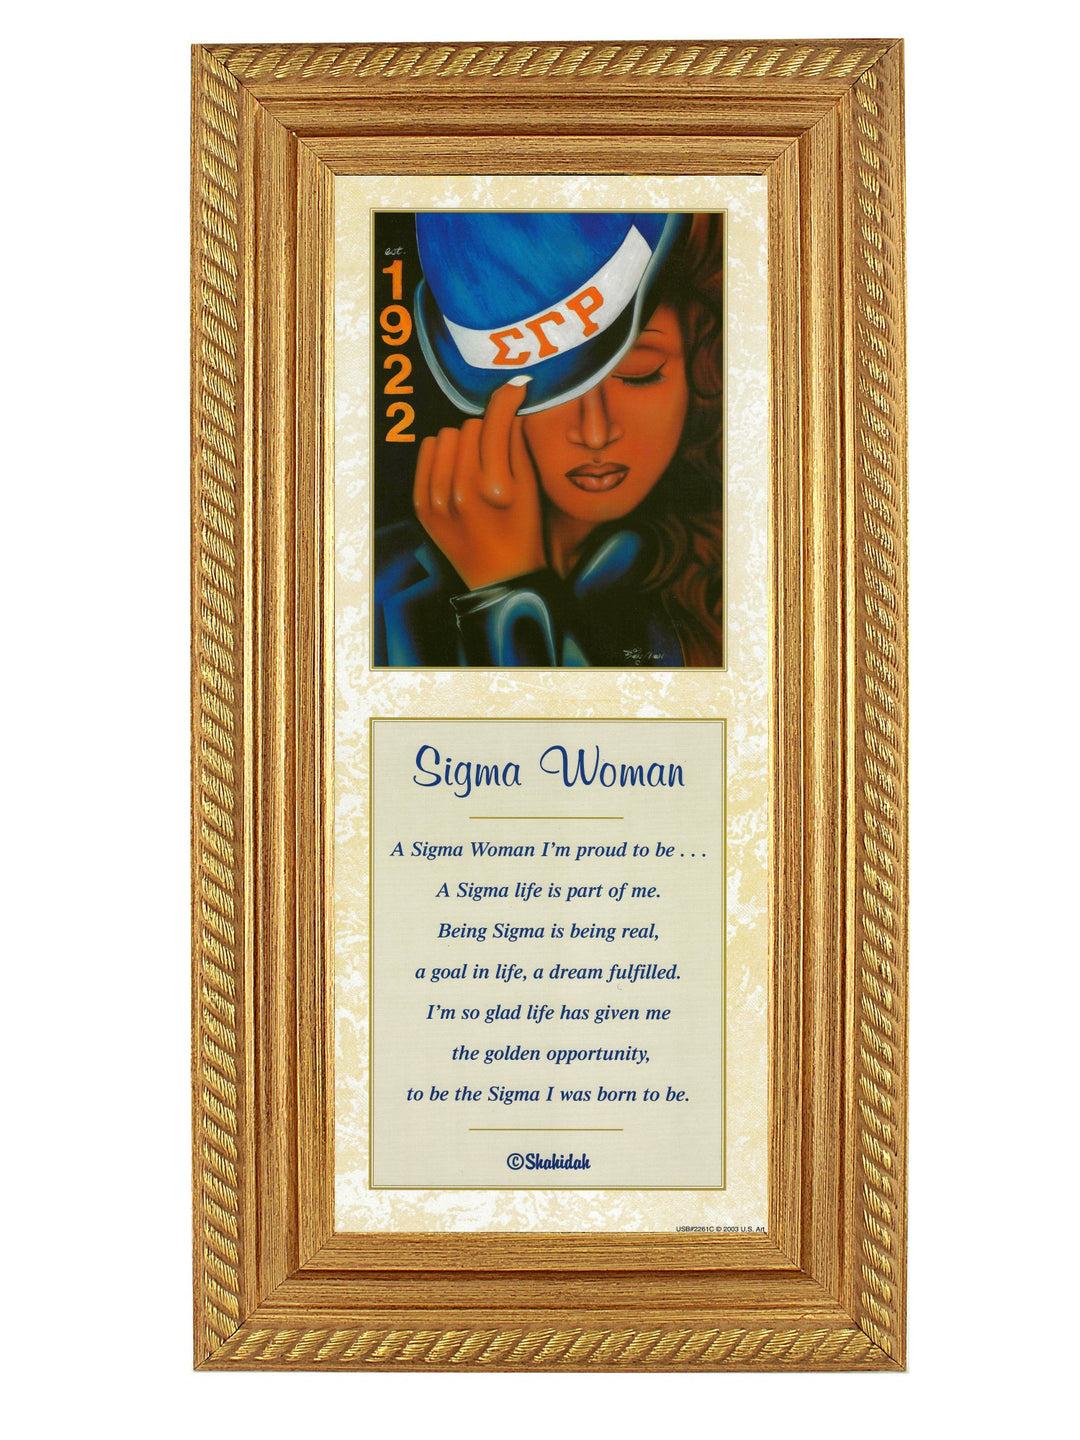 Sigma Woman by Fred Mathews and Shahidah (Gold Rope Frame)